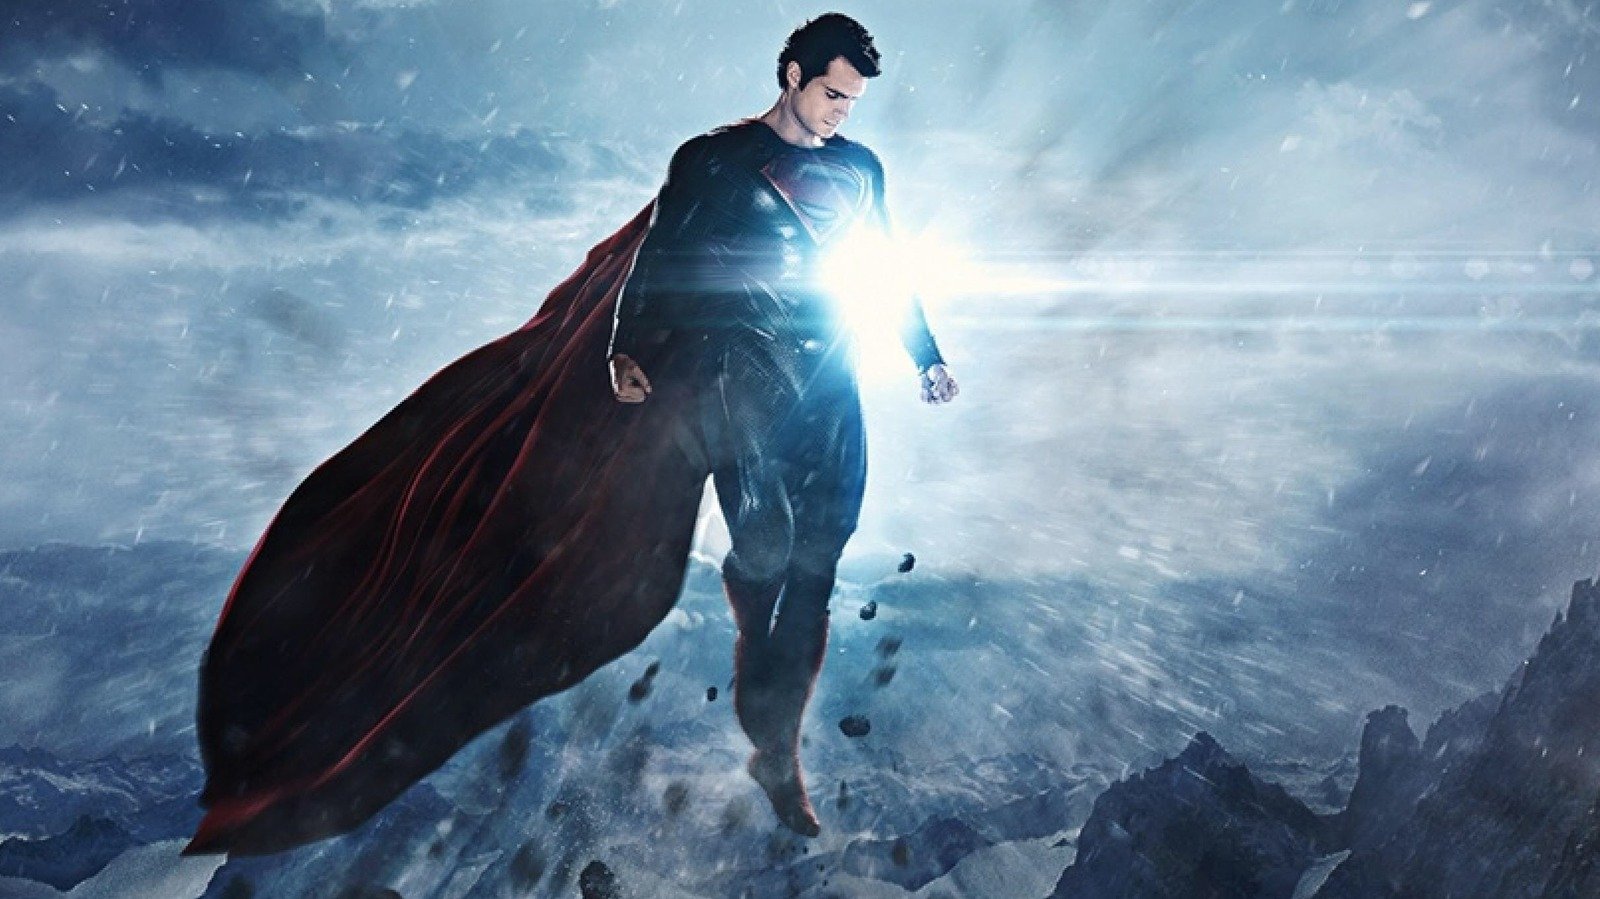 Zack Snyder Recalls Casting Henry Cavill For Man Of Steel: 'That's What Superman Looks Like' - /Film